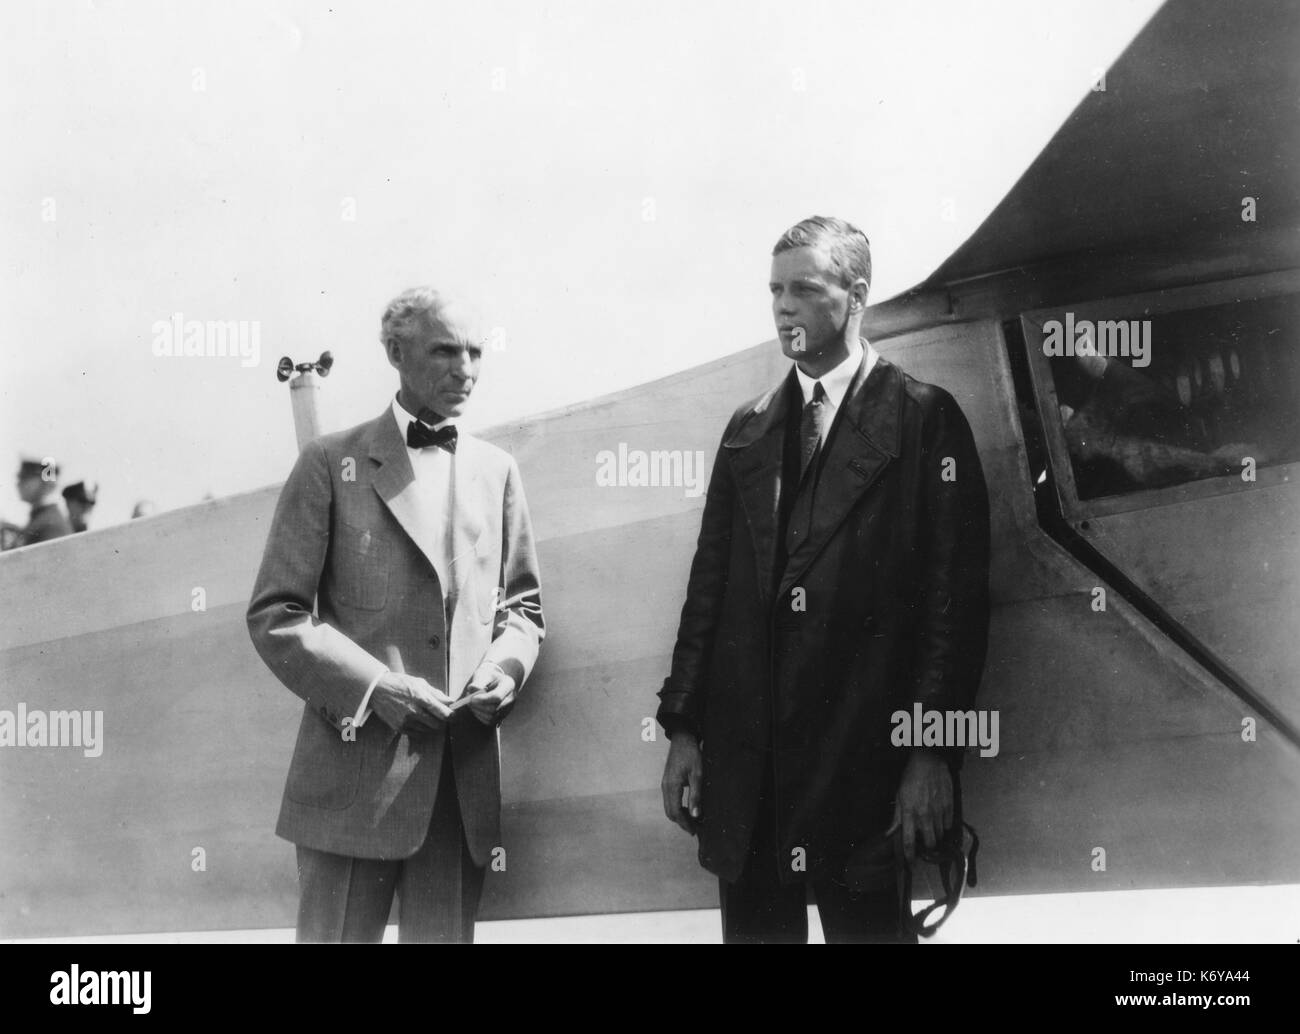 The Lone Eagle, Charles A. Lindbergh (right), stands with Henry Ford beside the 'Spirit of St. Louis,' the plane in which Col Lindbergh flew the first transatlantic solo flight in 1927. The famous flyer visited Mr. Ford in Dearborn in August 1927. Dearborn, MI, 1927. Stock Photo